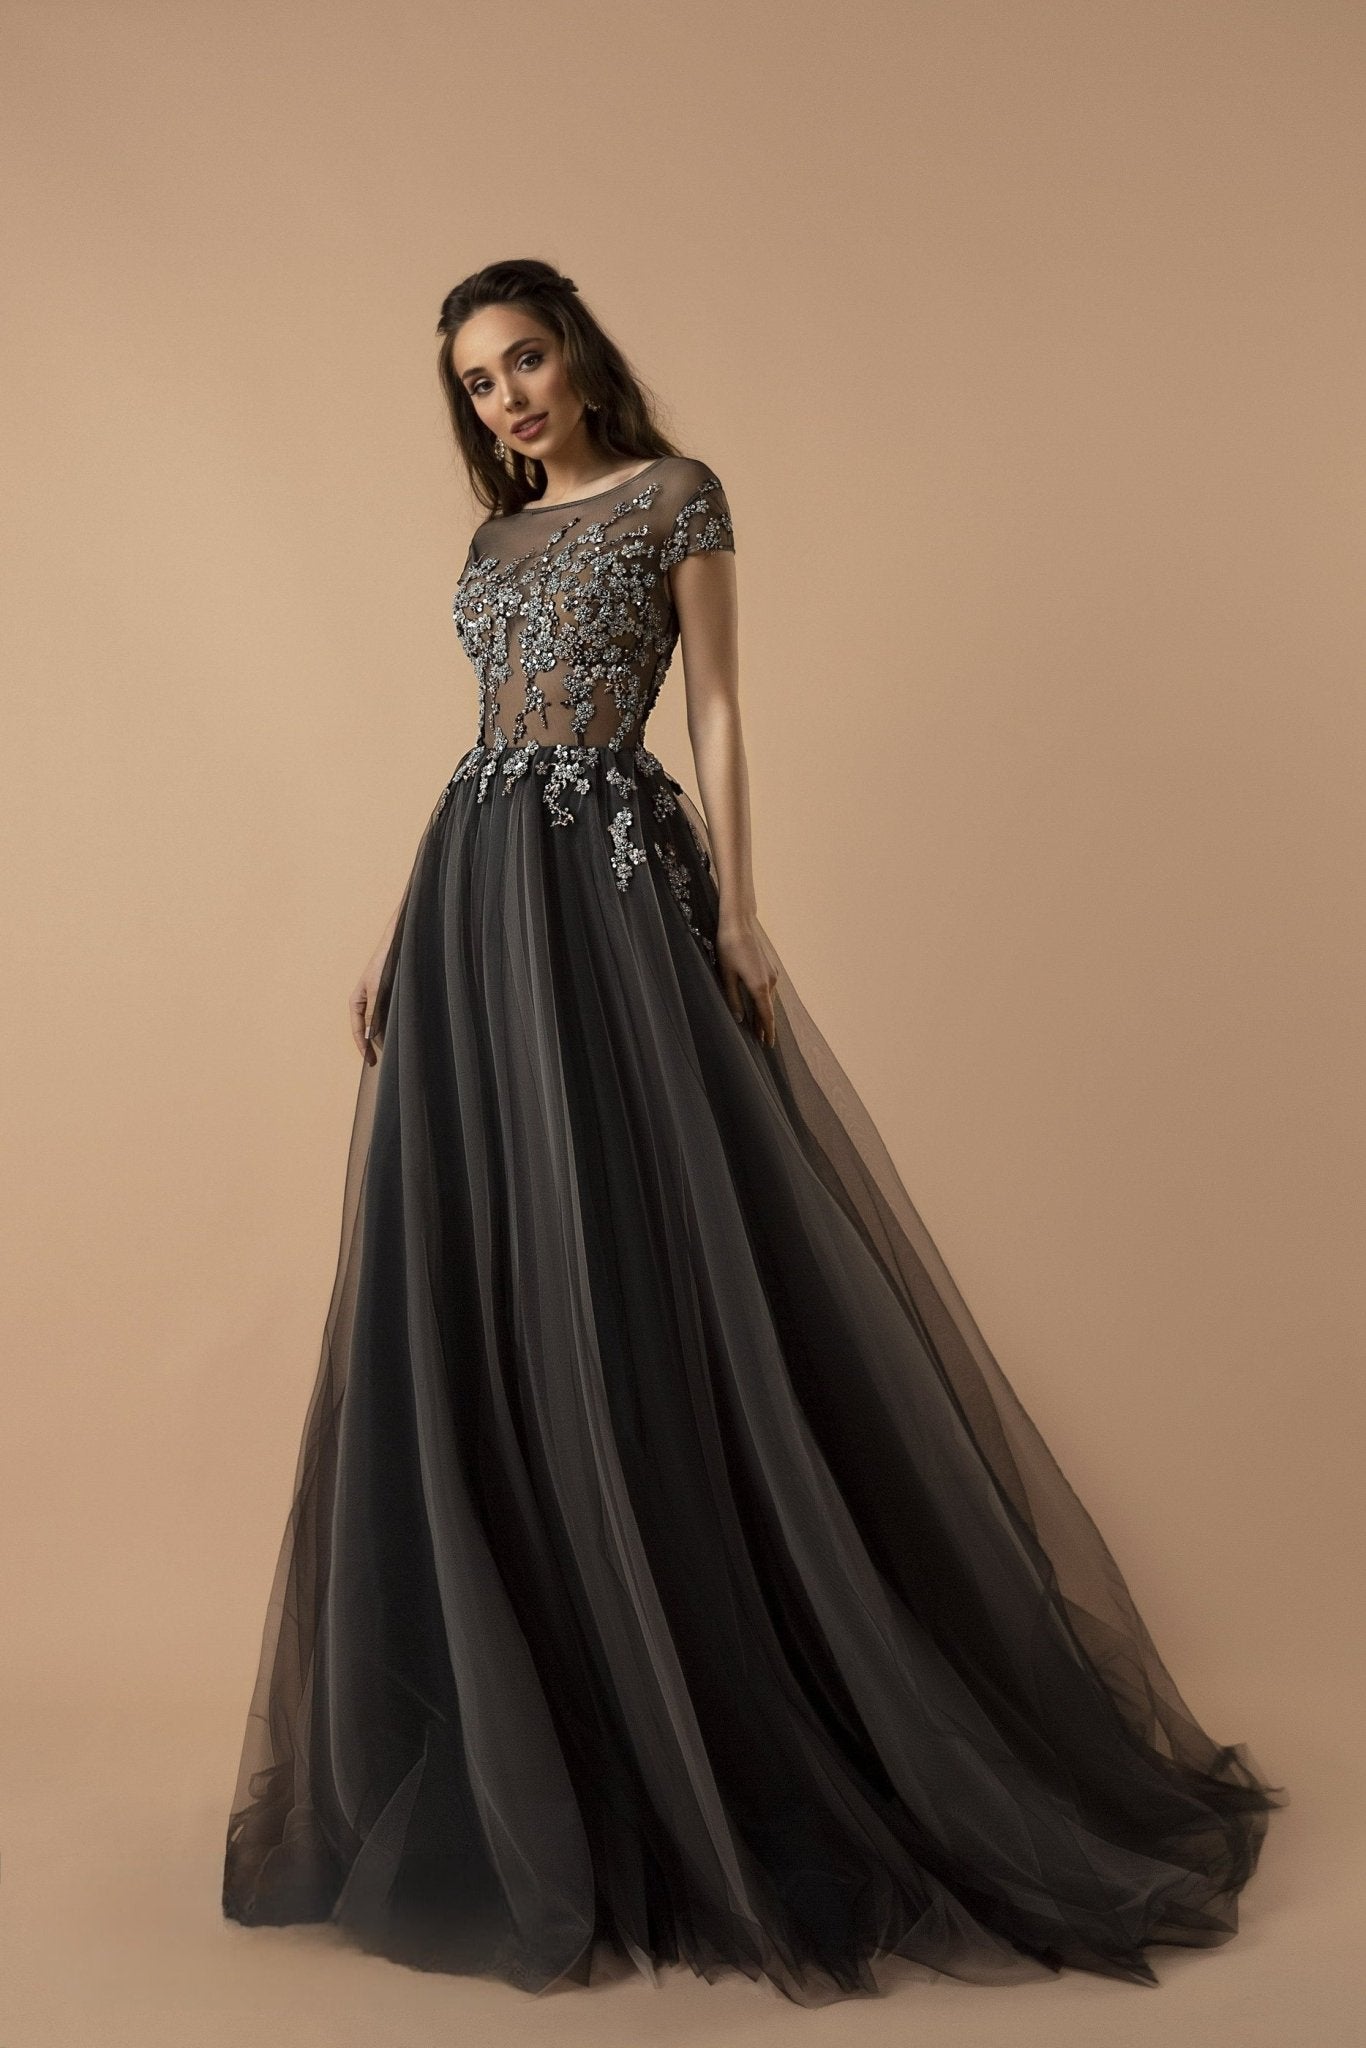 Gothic Black And Silver Charcoal Sequins A-Line Gown -Tulle Beaded Wedding Dress Plus Size - WonderlandByLilian